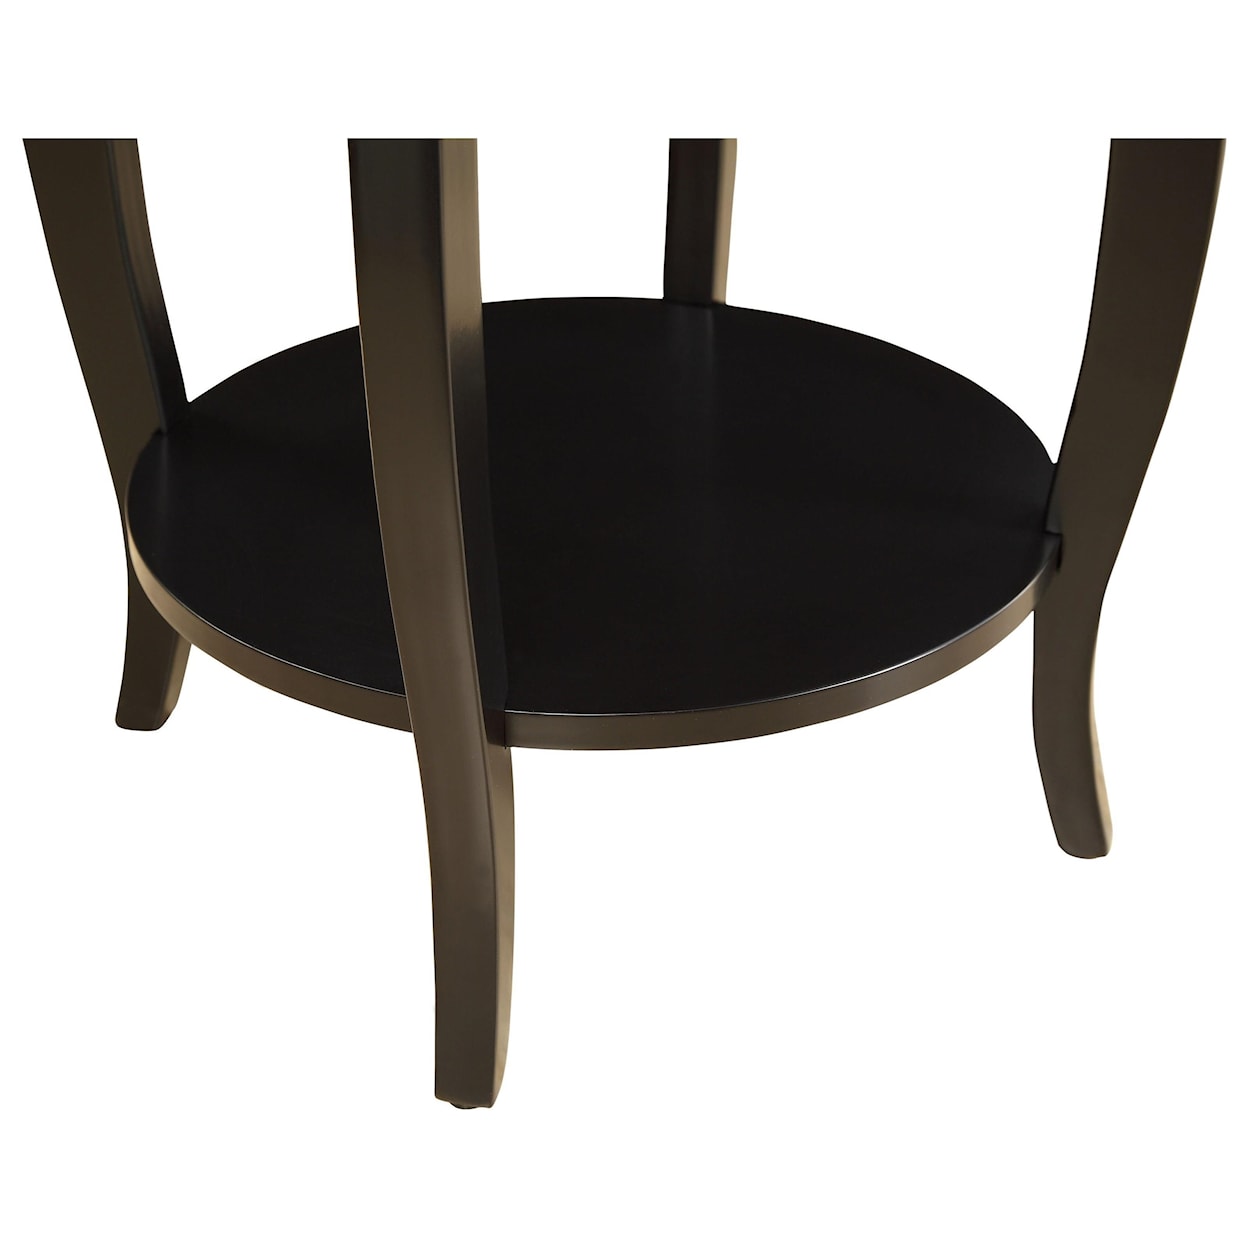 Acme Furniture Alysa End Table